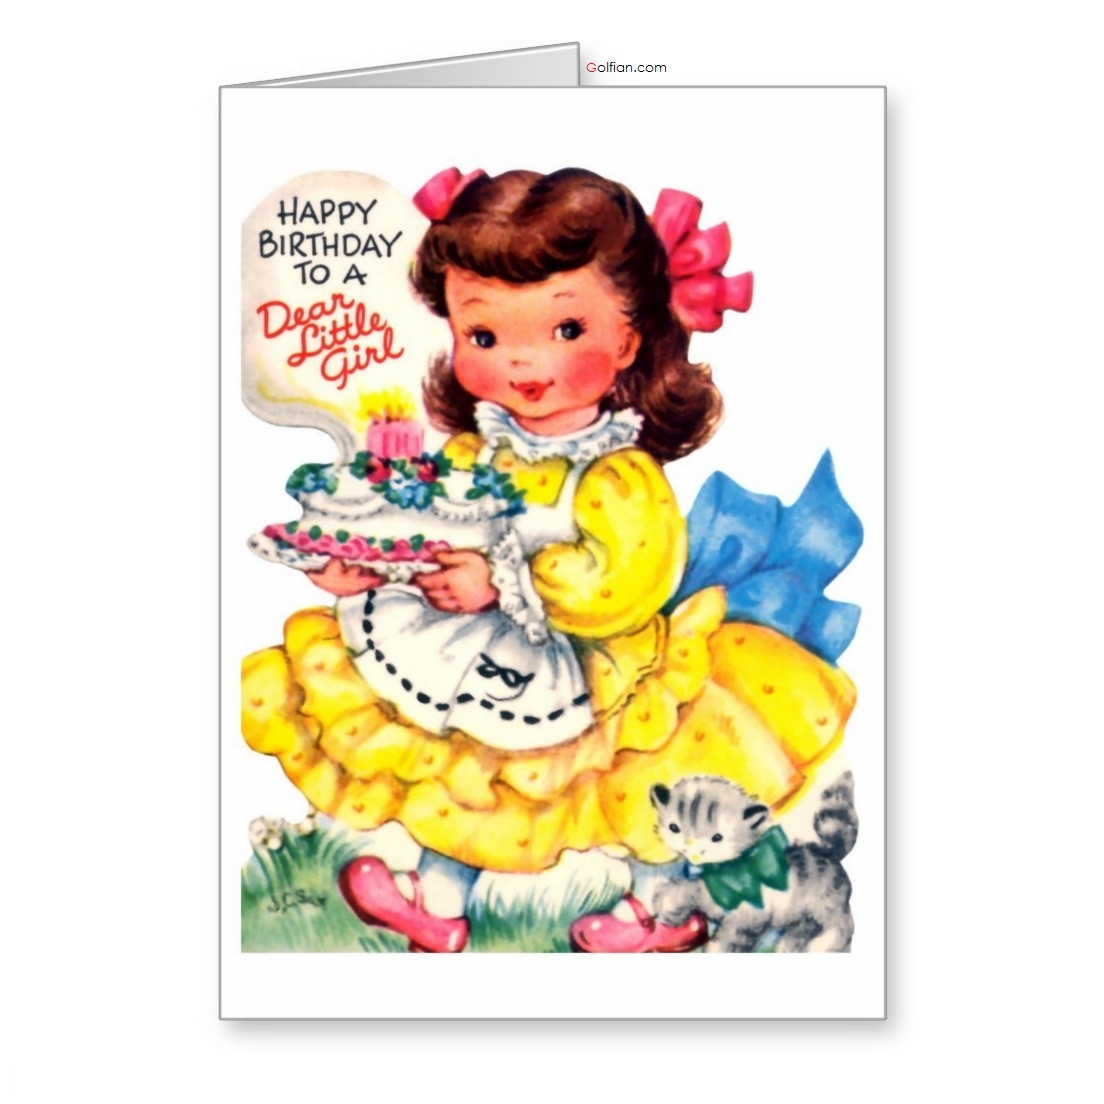 Birthday Wishes For Little Girls
 50 Beautiful Birthday Wishes For Little Girl – Popular